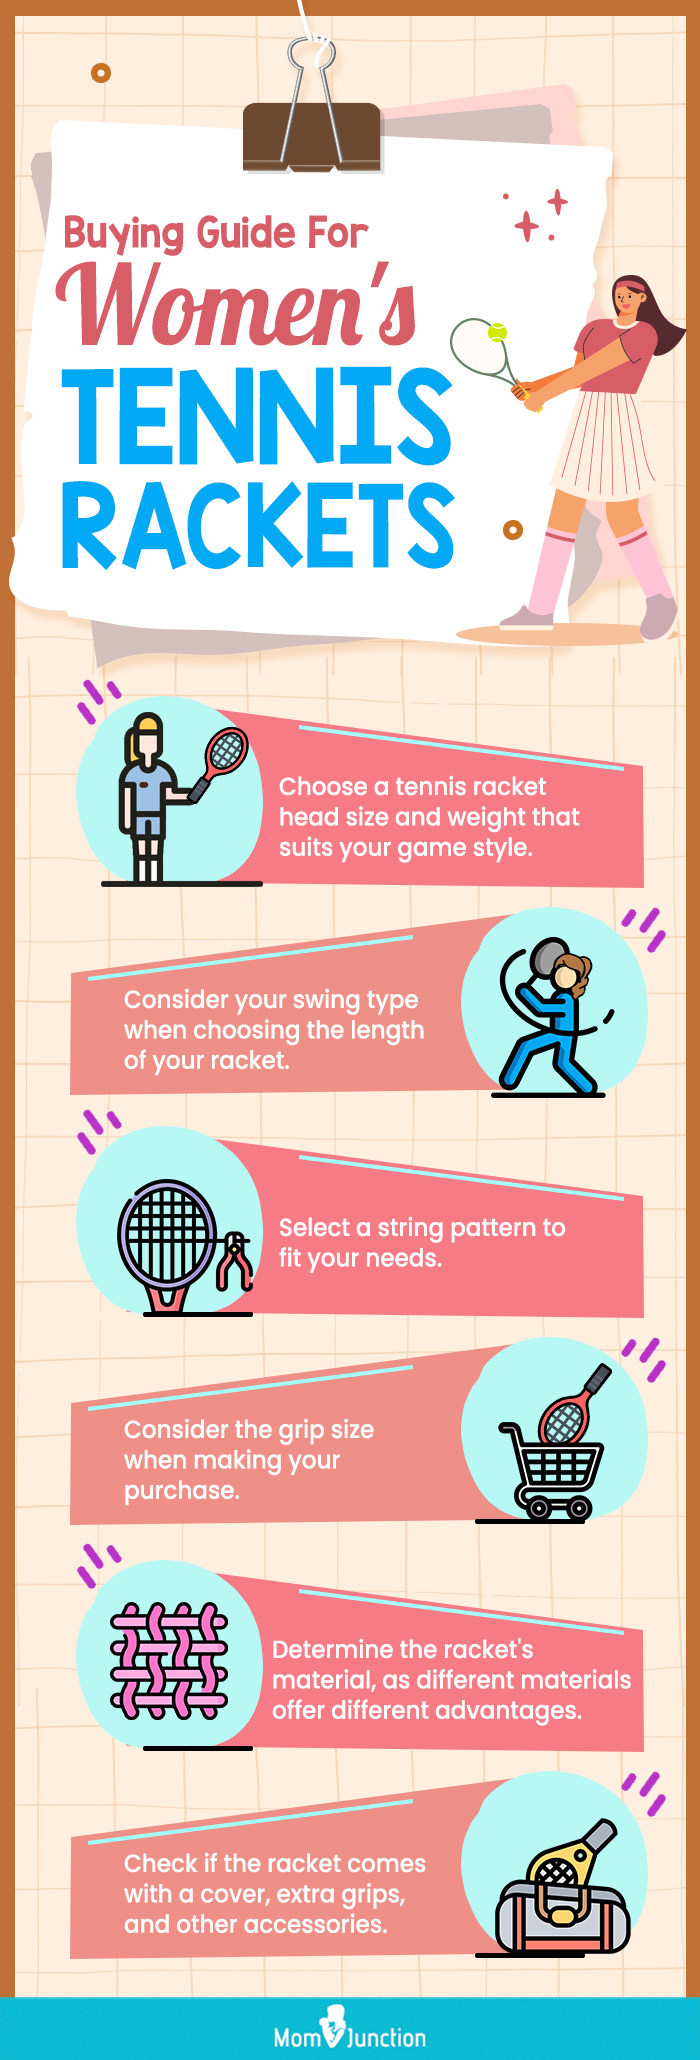 Buying-Guide-For-Women's-Tennis-Rackets-2 (infographic)